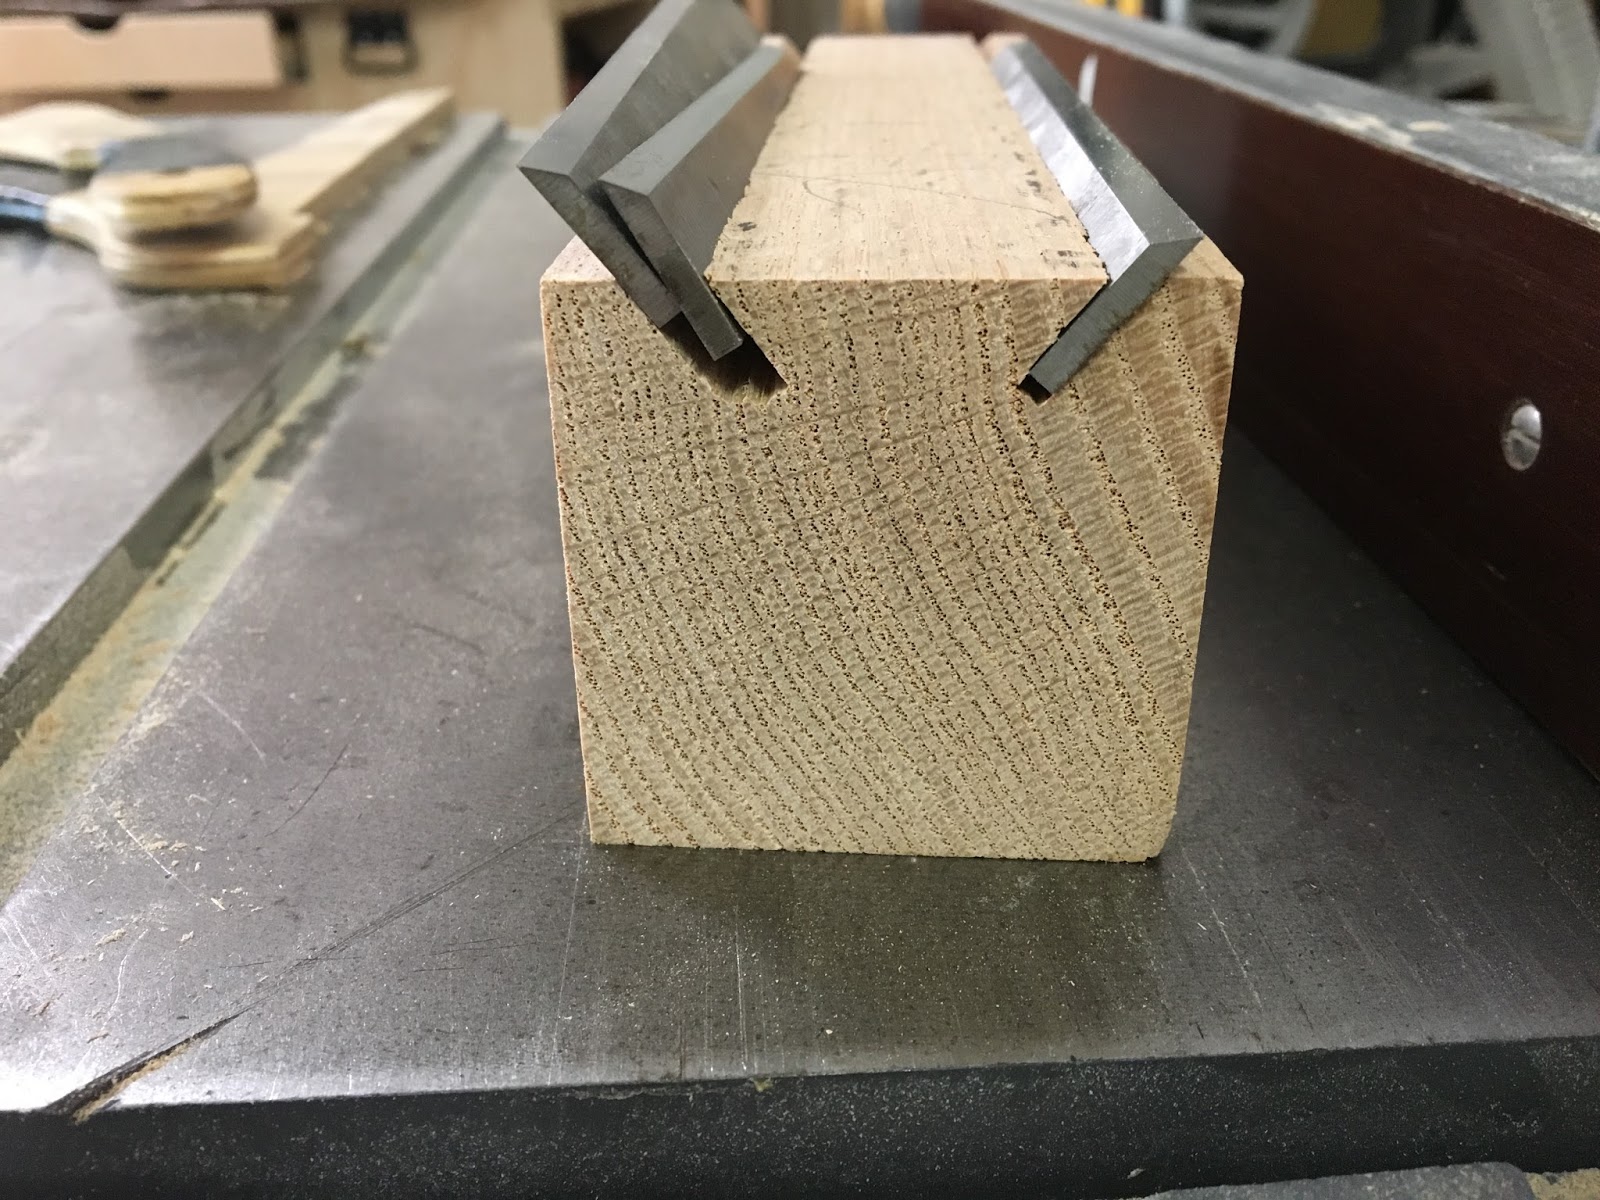 The Project Lady - $9 Homemade Jig for Sharpening Jointer Knives